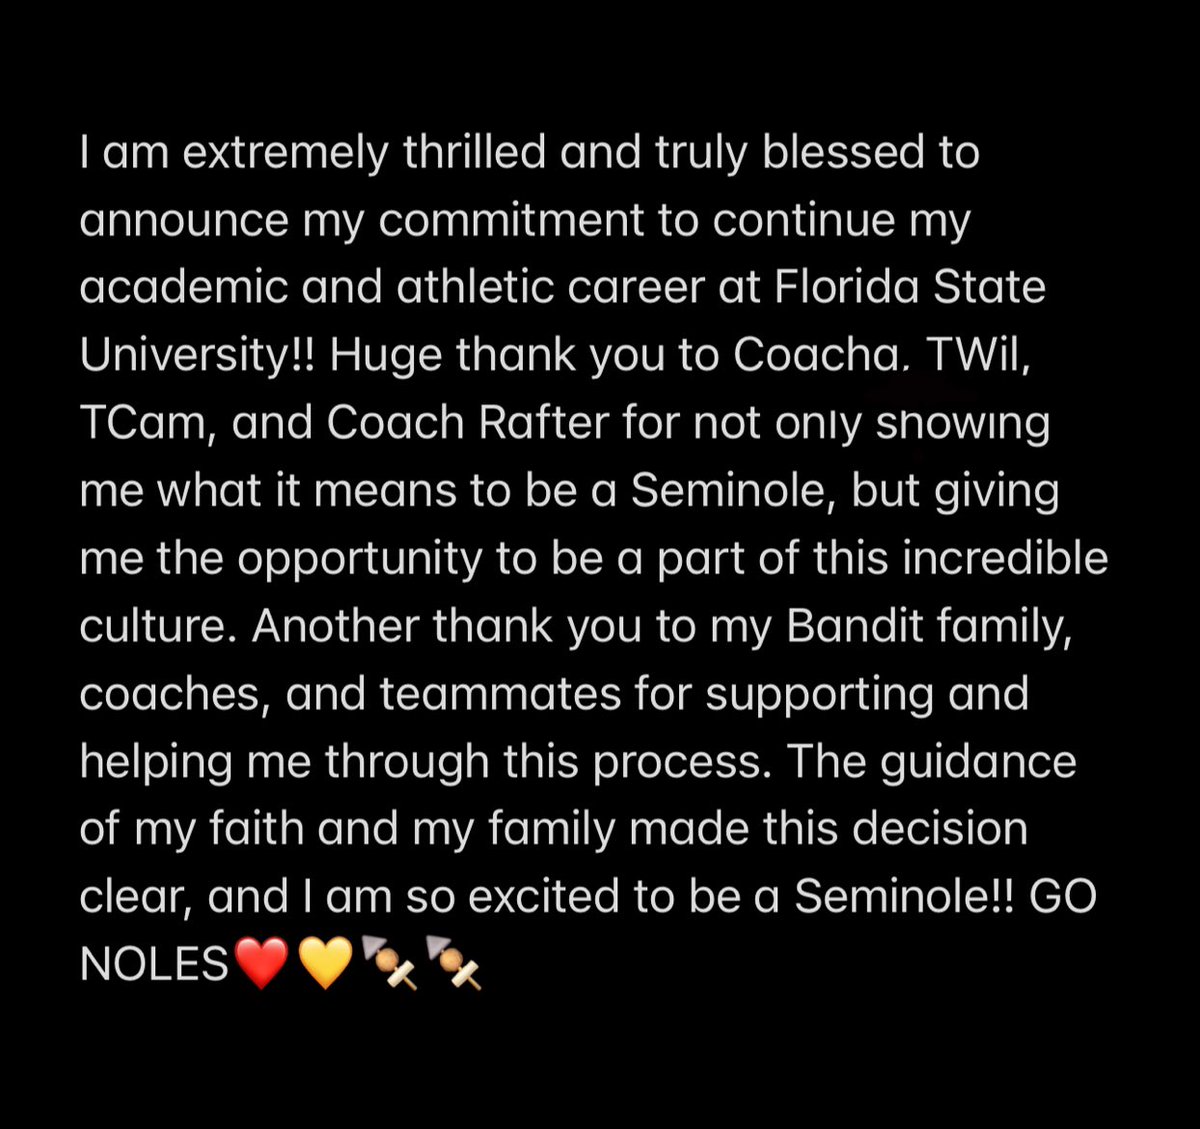 #committed ❤️❤️